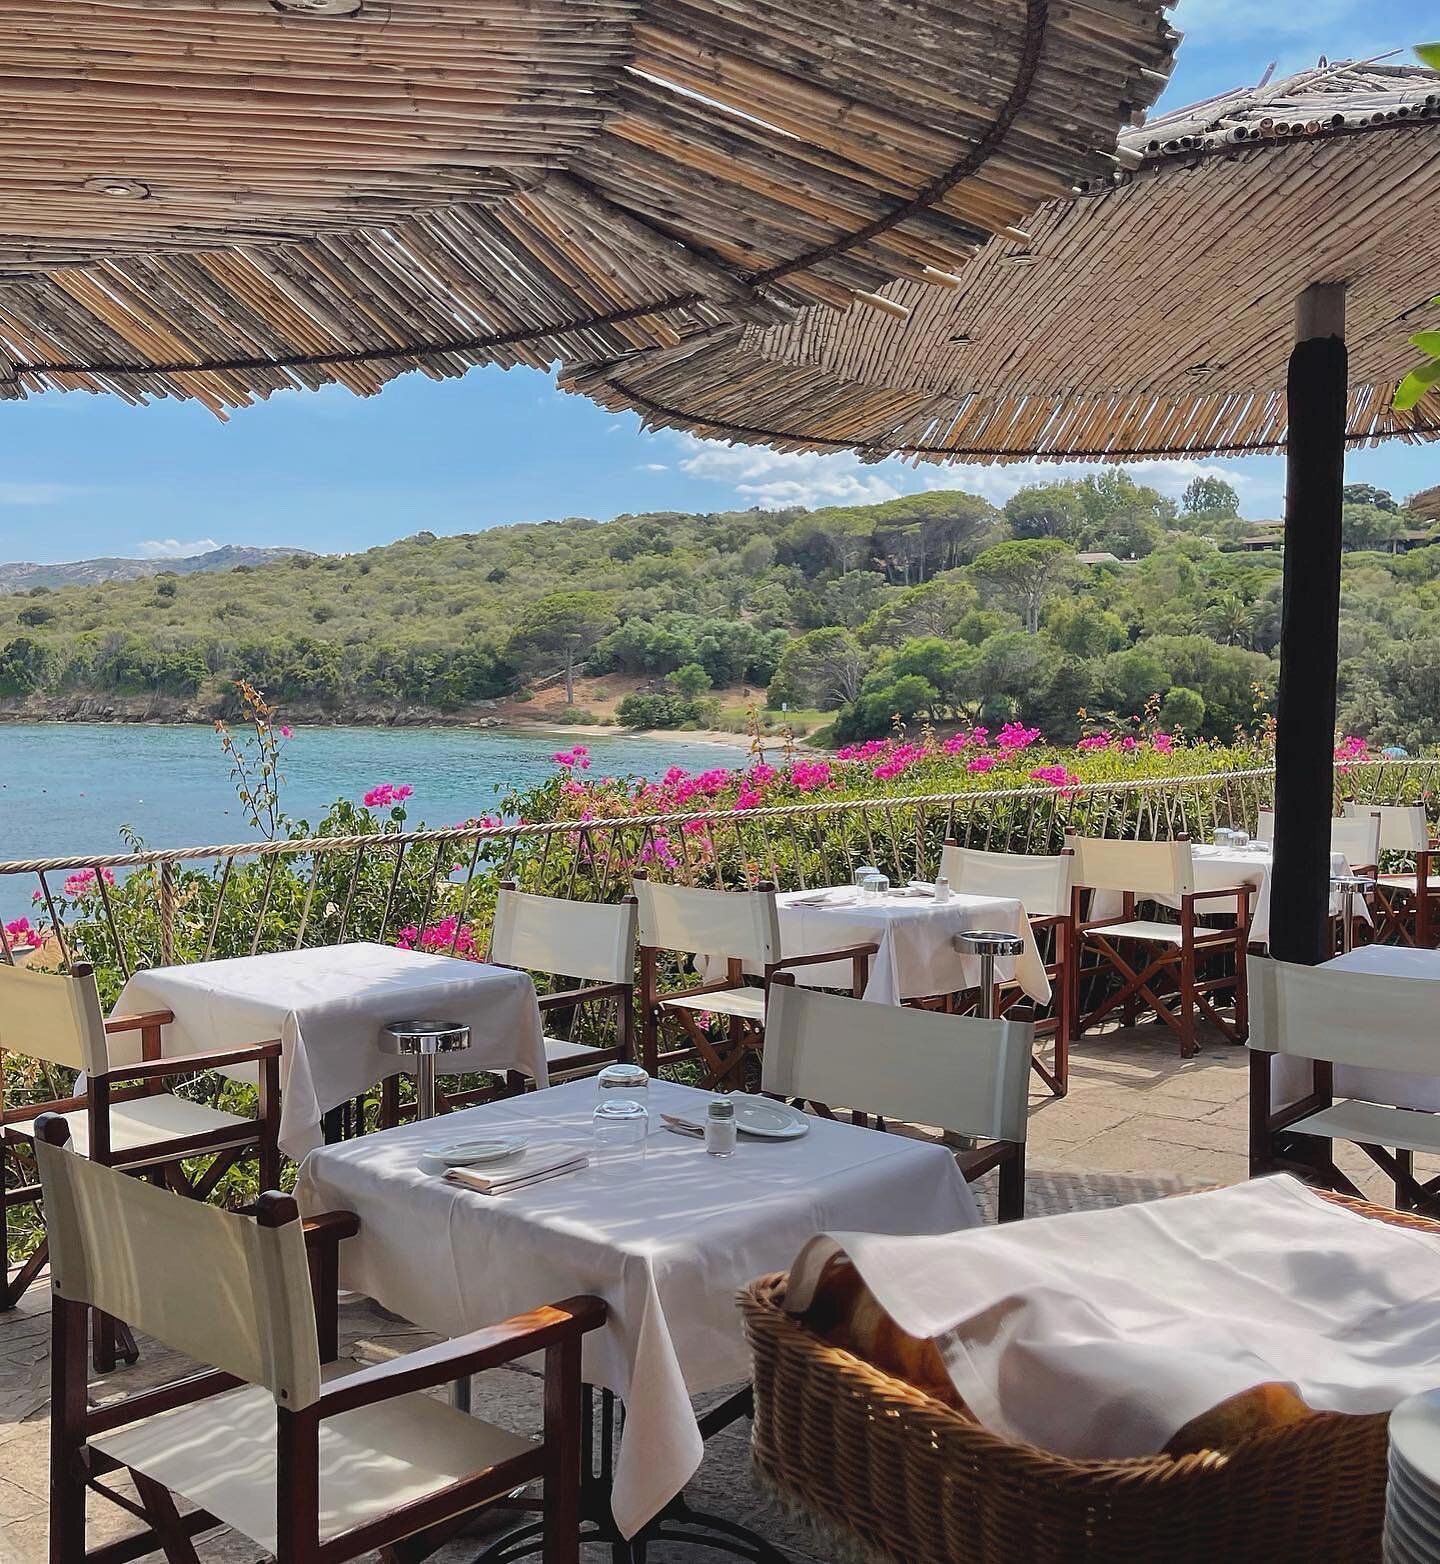 A memorable lunch at @il_paguro_ristorante located in the Cala Capra Marina in Palau, Sardinia. An exceptional solution for those travelling by boat with the yatch marina located steps away. 
Its terrace overlooks the crystalline blue sea of Northern